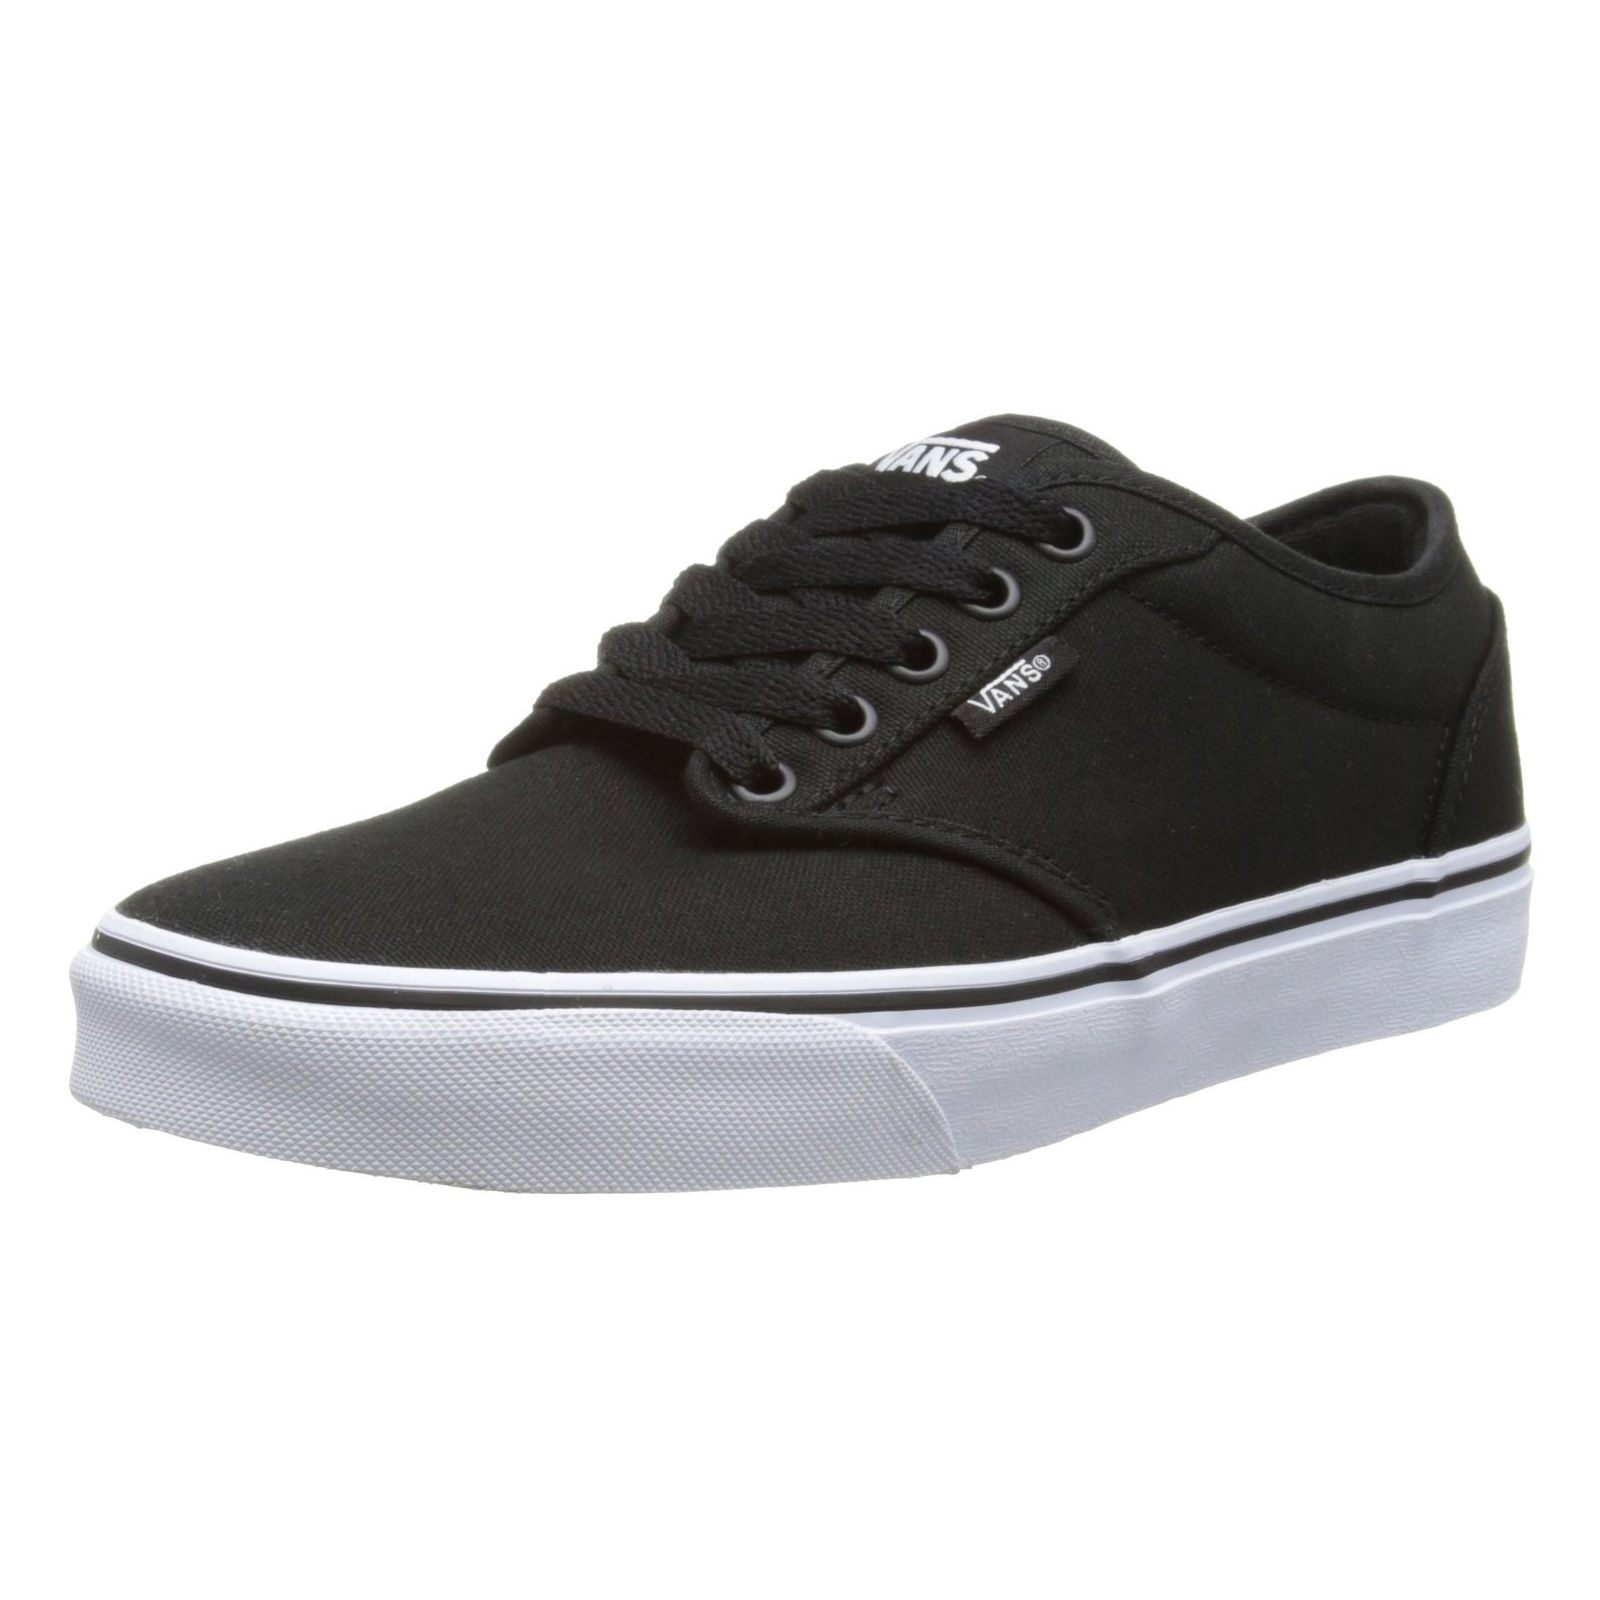 VANS Atwood Mens Canvas Skater Trainers 